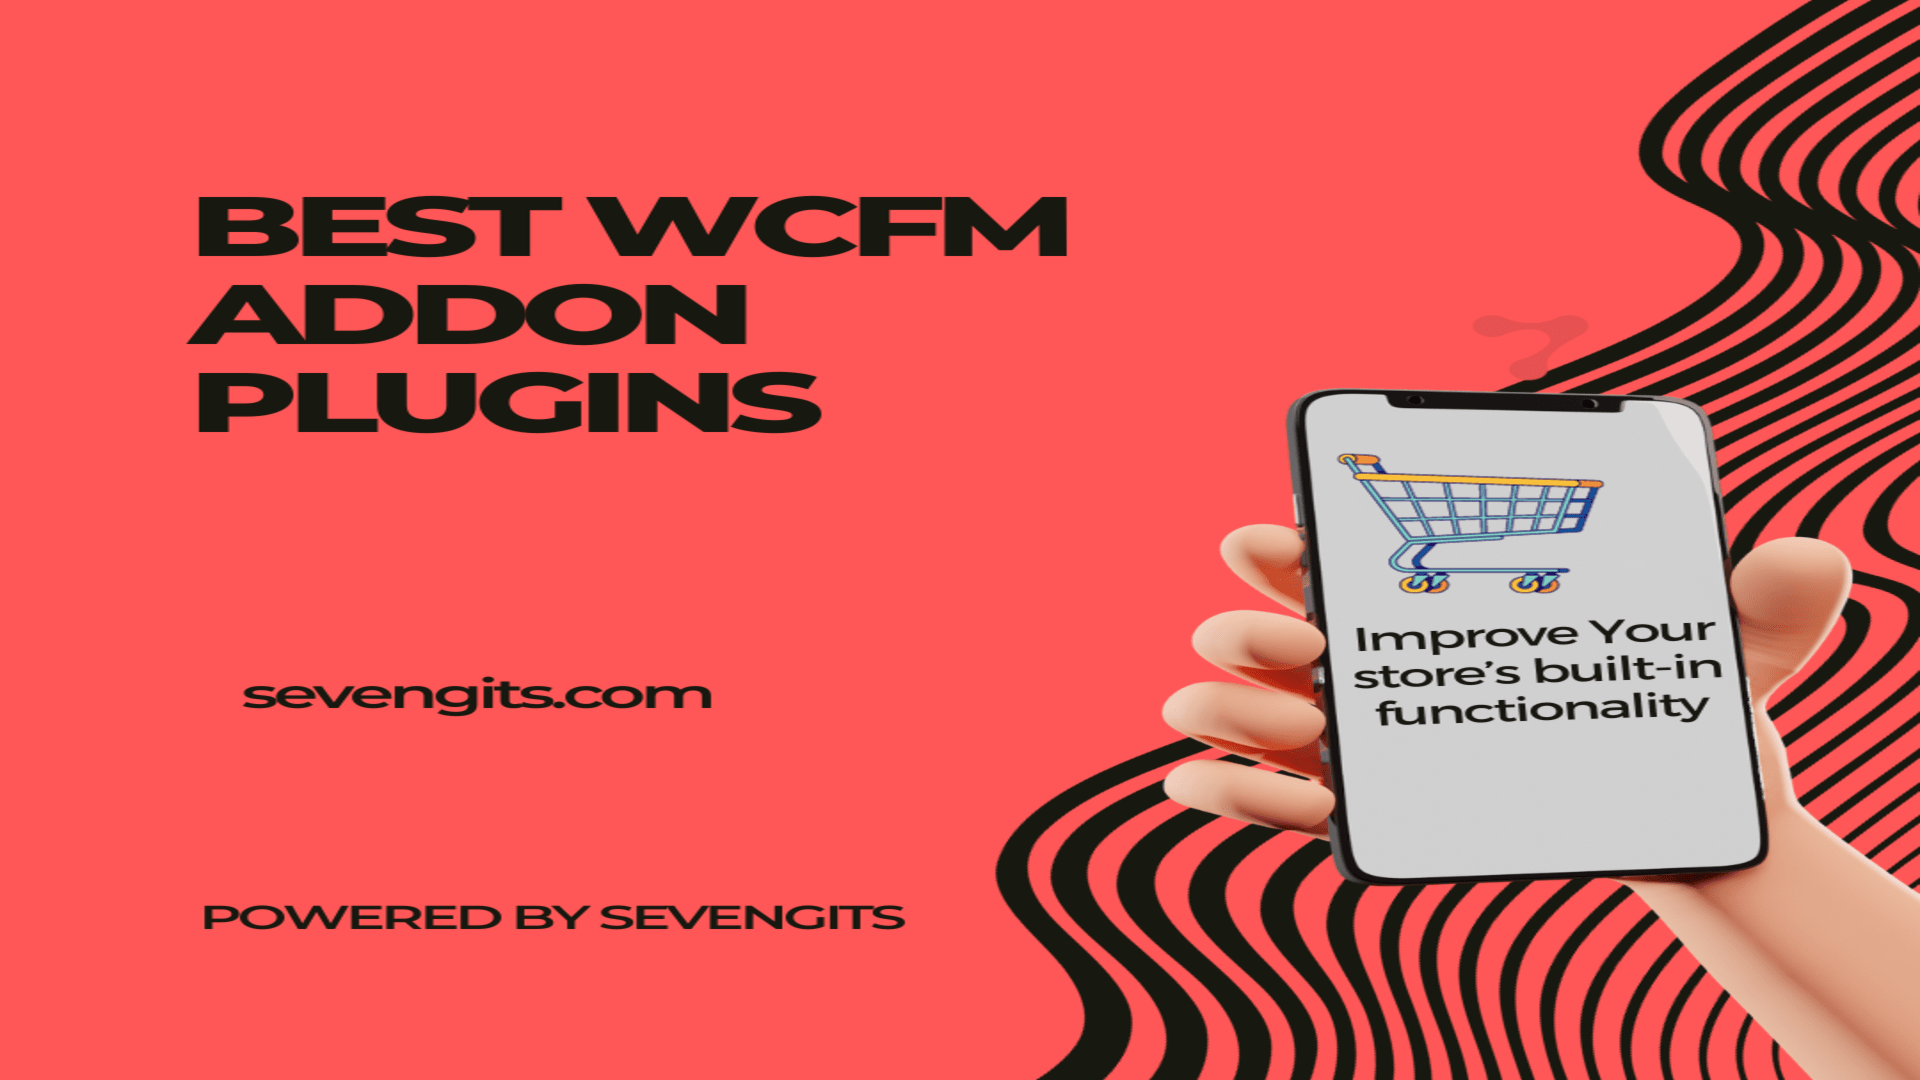 5 Best WCFM Addon Plugins to Further Improve Your Store’s Built-In Functionality